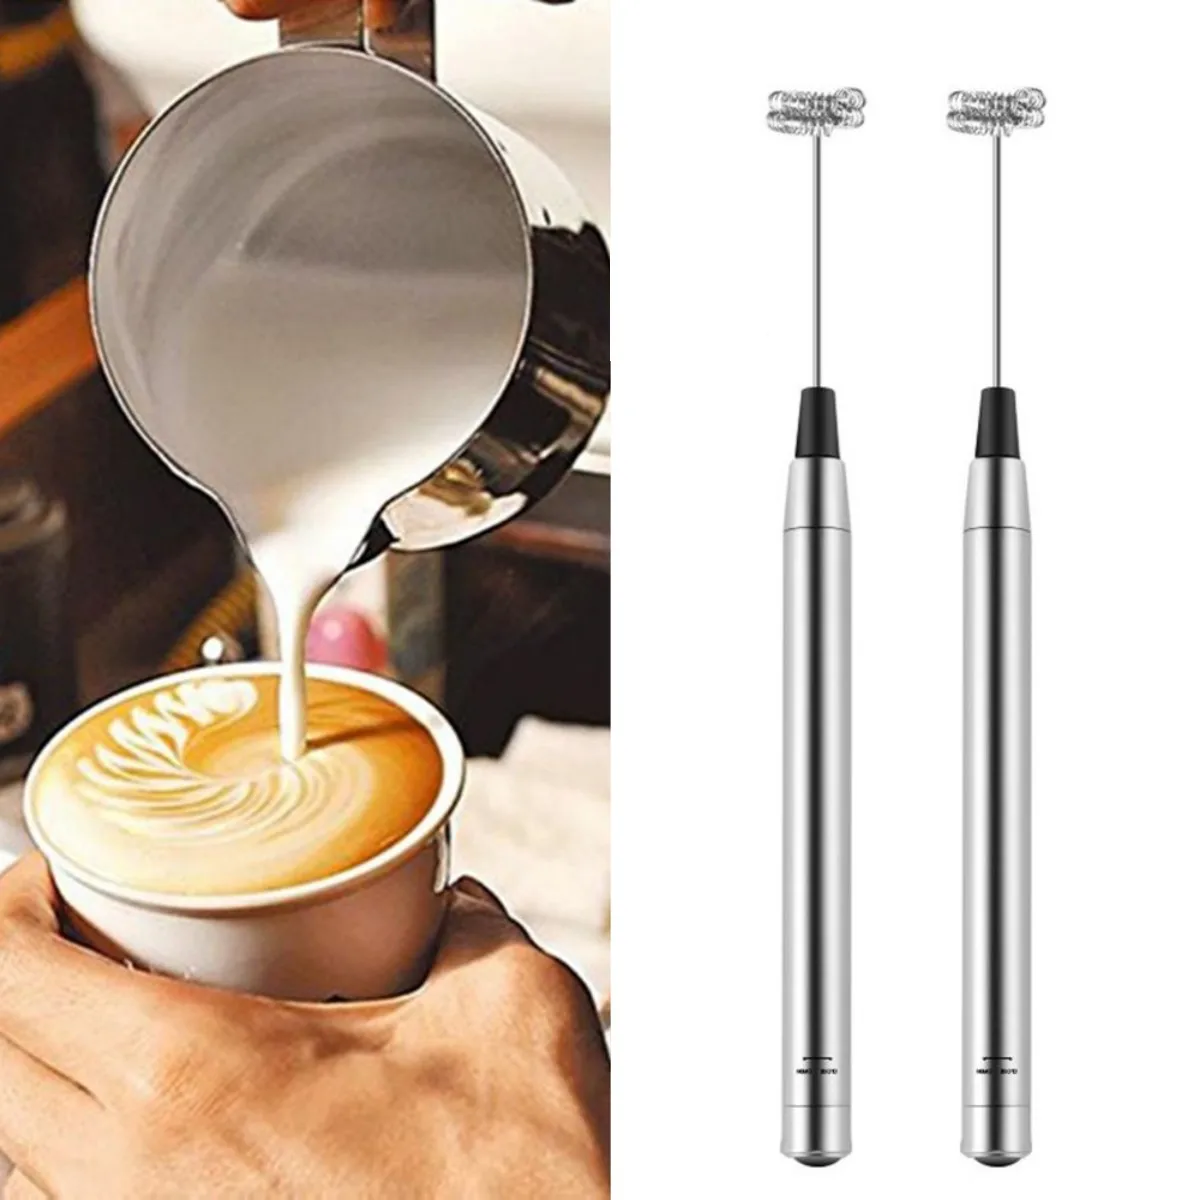 https://ae01.alicdn.com/kf/S19a3141c3ad84f08a95e1715cee1197cA/Automatic-Hand-Held-Foam-Coffee-Machine-Whisk-Electric-Milk-Frother-Portable-Kitchen-Coffee-Whisk-Tool-Wireless.jpeg